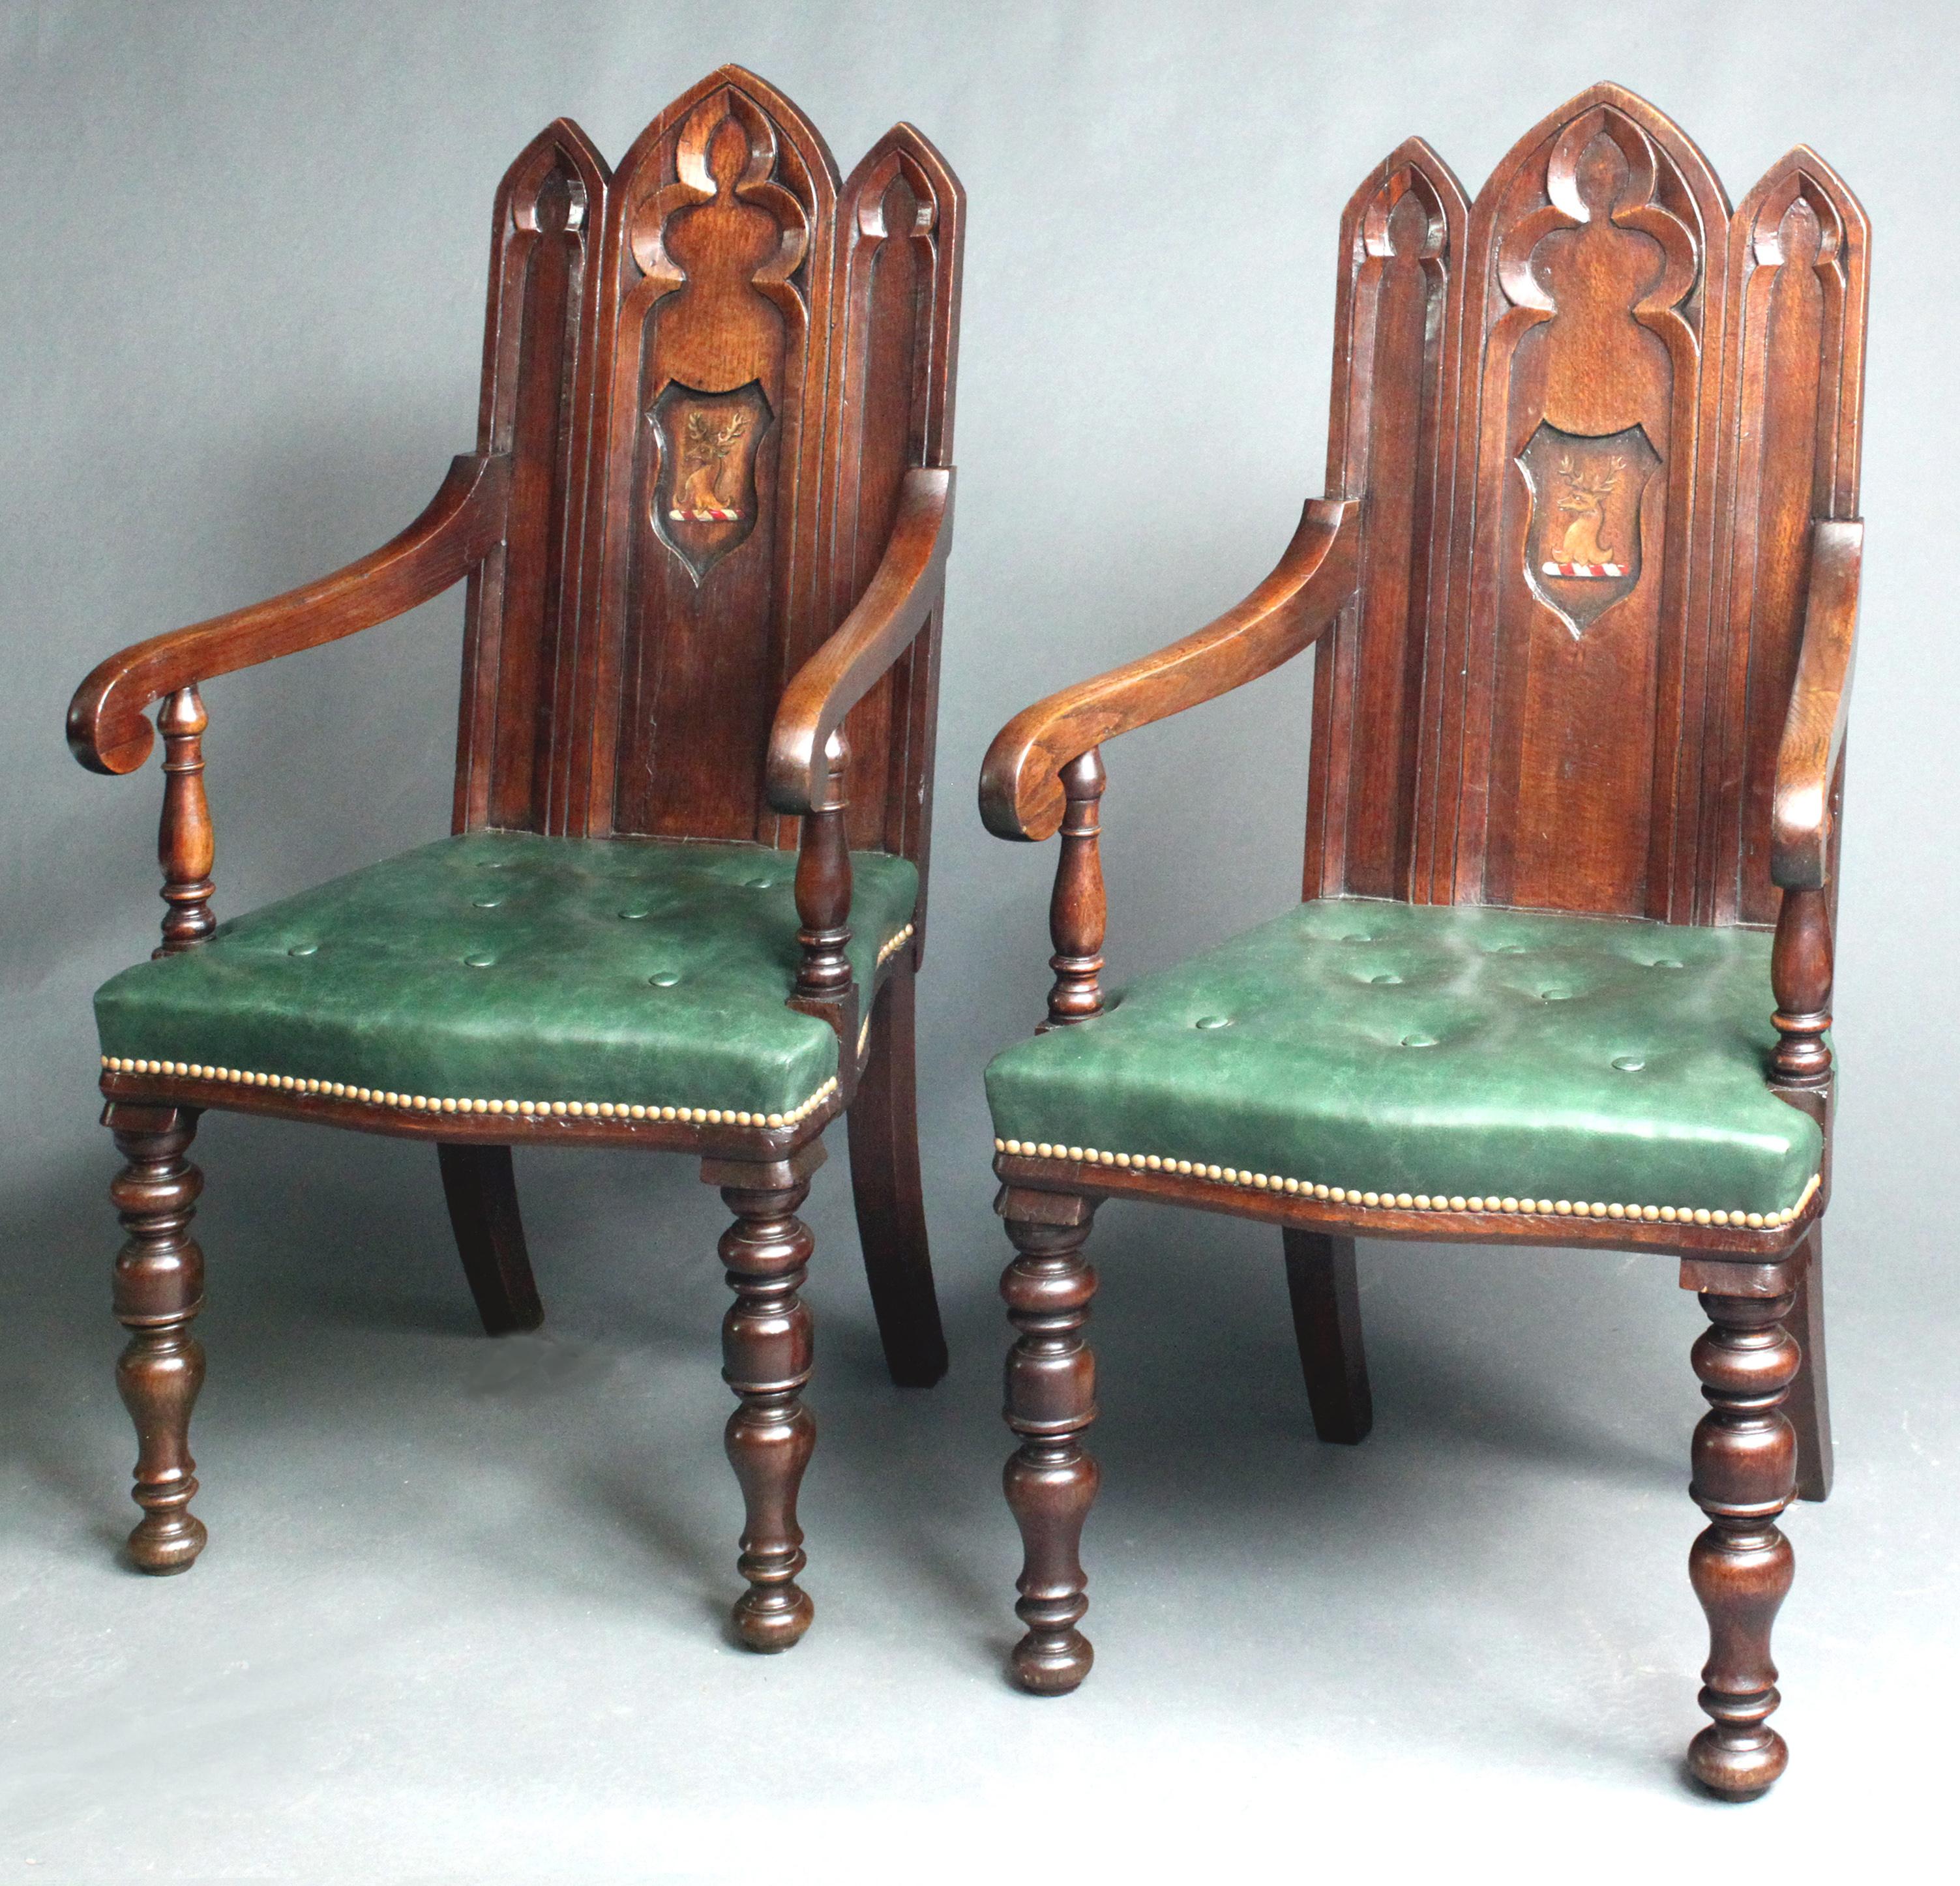 A pair of Victorian gothic oak hall chairs with arms; well turned front legs and green leather buttoned seats.
There was evidence of paint in the centre reserves, no doubt a crest or armorial which had been removed, so we commissioned a local artist